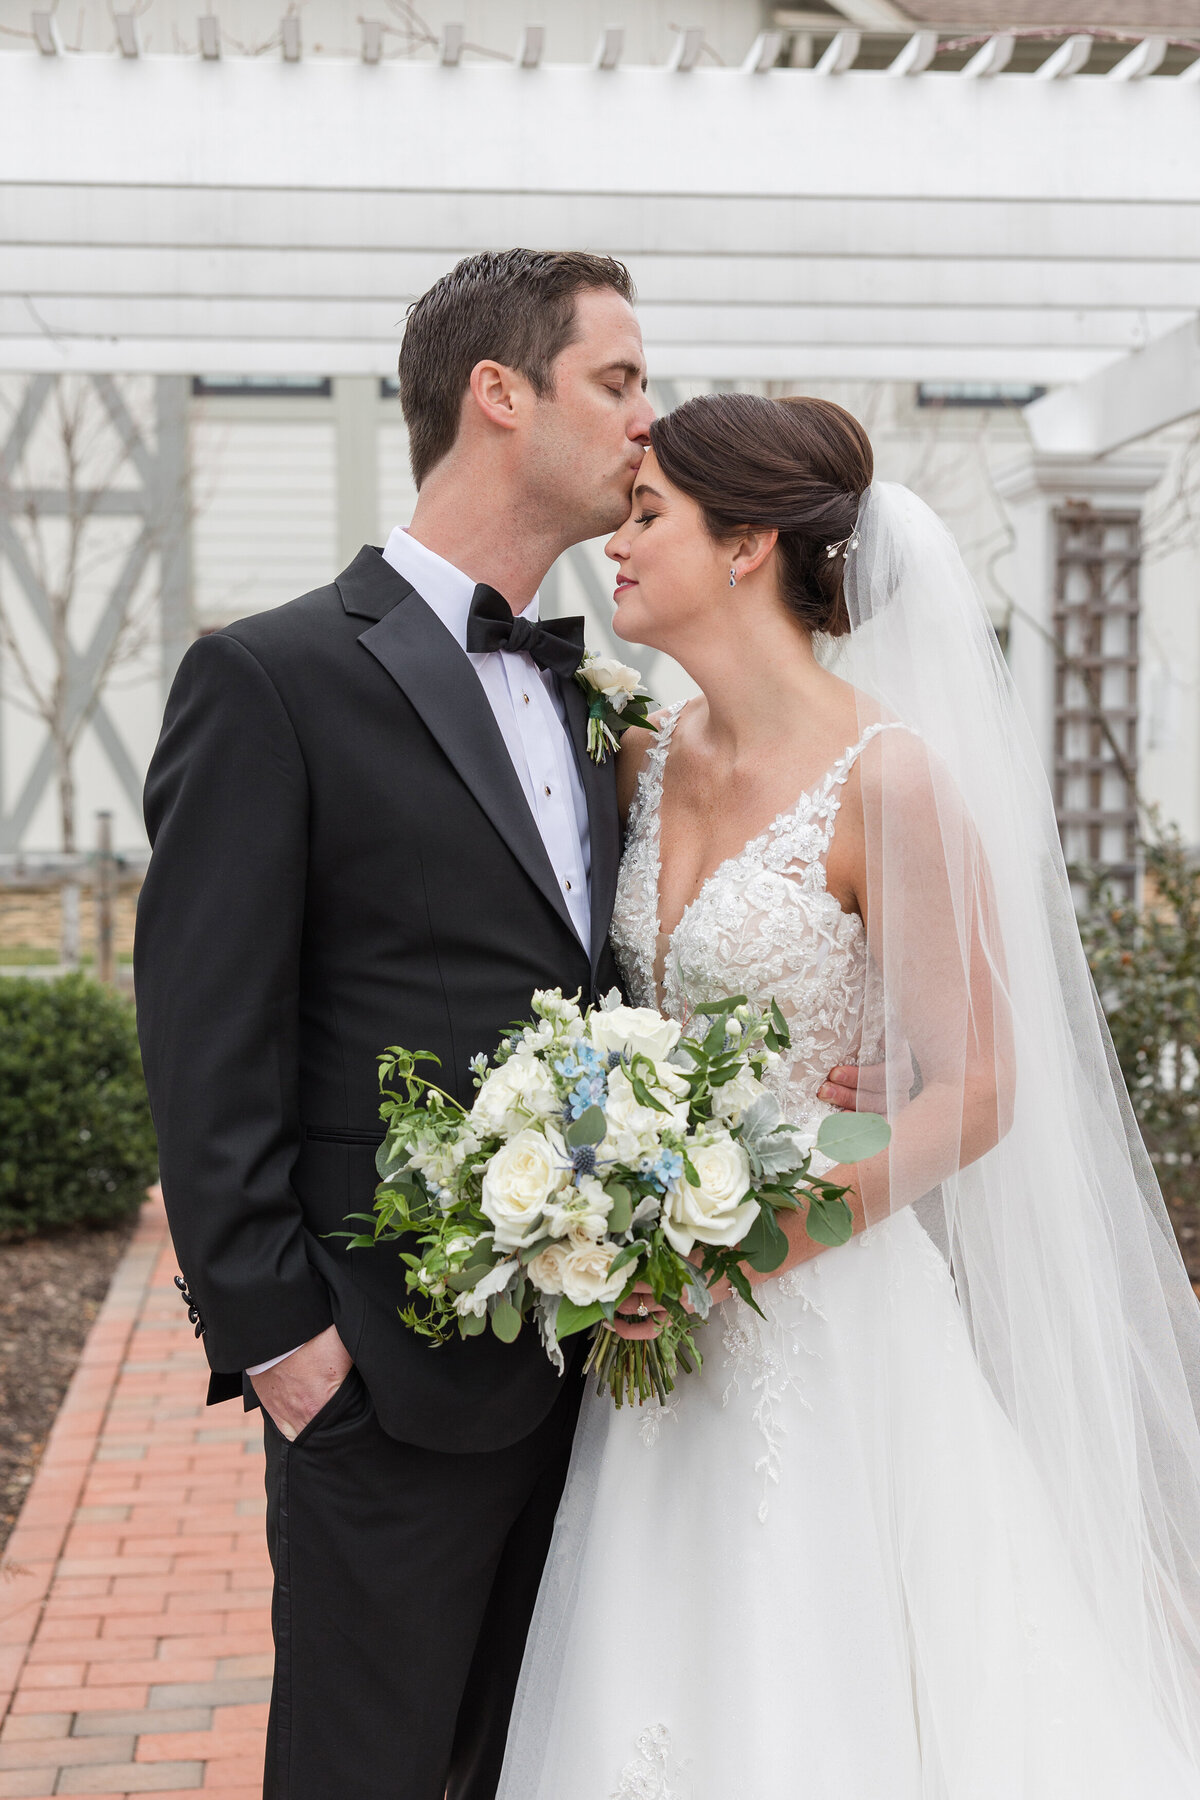 Chesapeake Bay Beach Club winter wedding portrait at The Inn of bride and groom by Christa Rae Photography